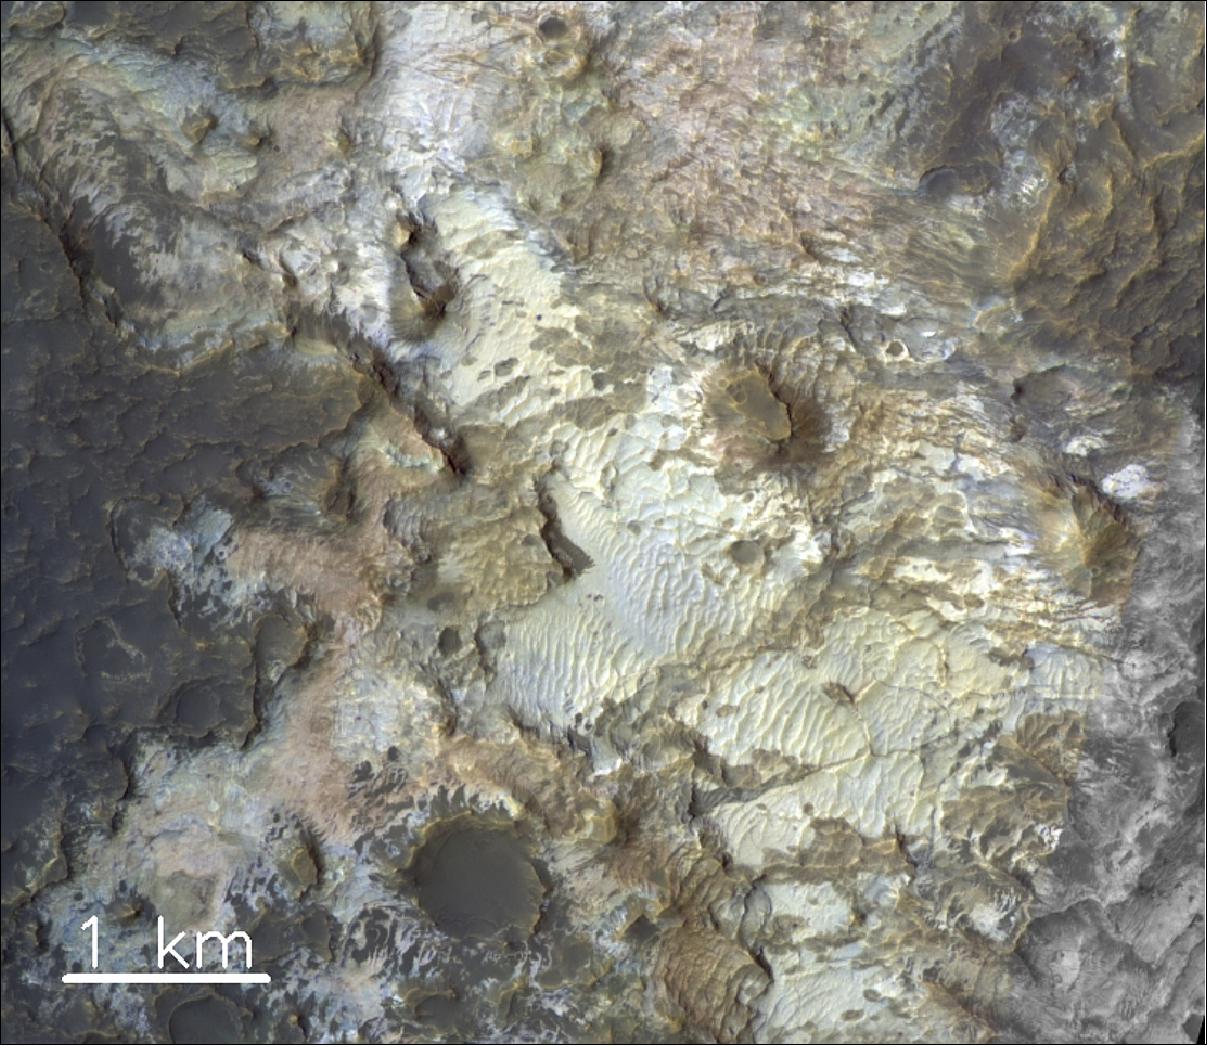 Figure 78: The subtle tints seen in this color-composite image of the floor of Kibuye crater on Mars, in the region of Terra Sirenum, highlight the rich variety of mineralogical composition found in these rocks. The image was taken by the CaSSIS instrument onboard the ESA-Roscosmos ExoMars TGO on 15 December 2018. Chloride salt and clay minerals have been identified here from orbit in the past by infrared spectrometers. CaSSIS color-composite images processed like this one allow scientists to refine the mapping of Mars mineralogy at higher spatial scales. In this region, for example, there is strong evidence for sustained weathering of the rocks by water and possible ancient lakes. Such color-composite images illustrate the extraordinary sensitivity of CaSSIS to the mineralogical composition of the rocks. The image is centered at 29.1ºS/178.2ºE (image credit: ESA/Roscosmos/CaSSIS, CC BY-SA 3.0 IGO)